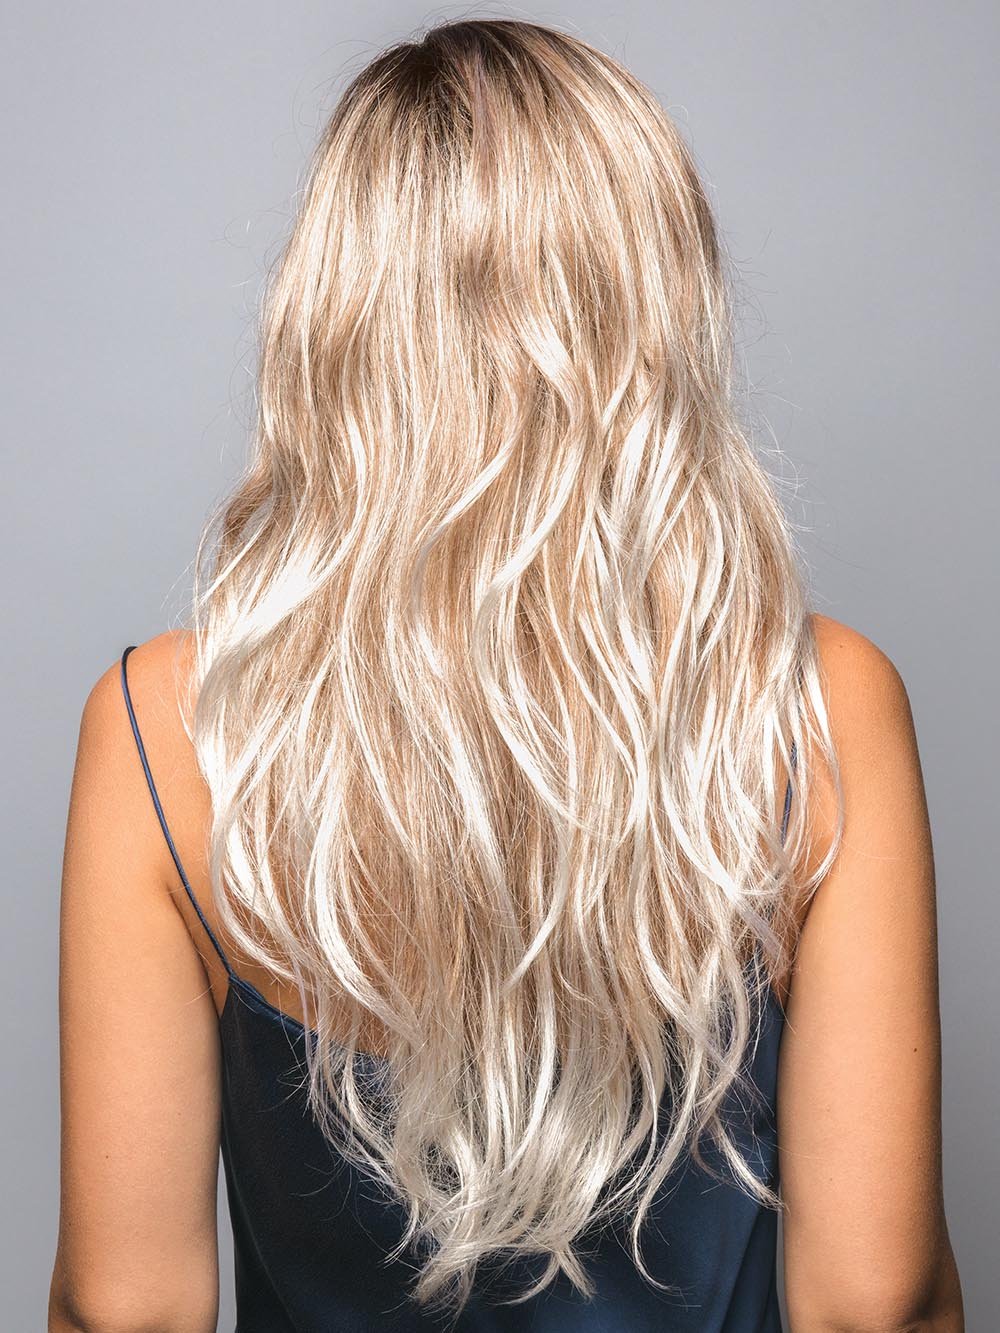 Long layers that add beautiful dimension and movement to this stunningly sexy style